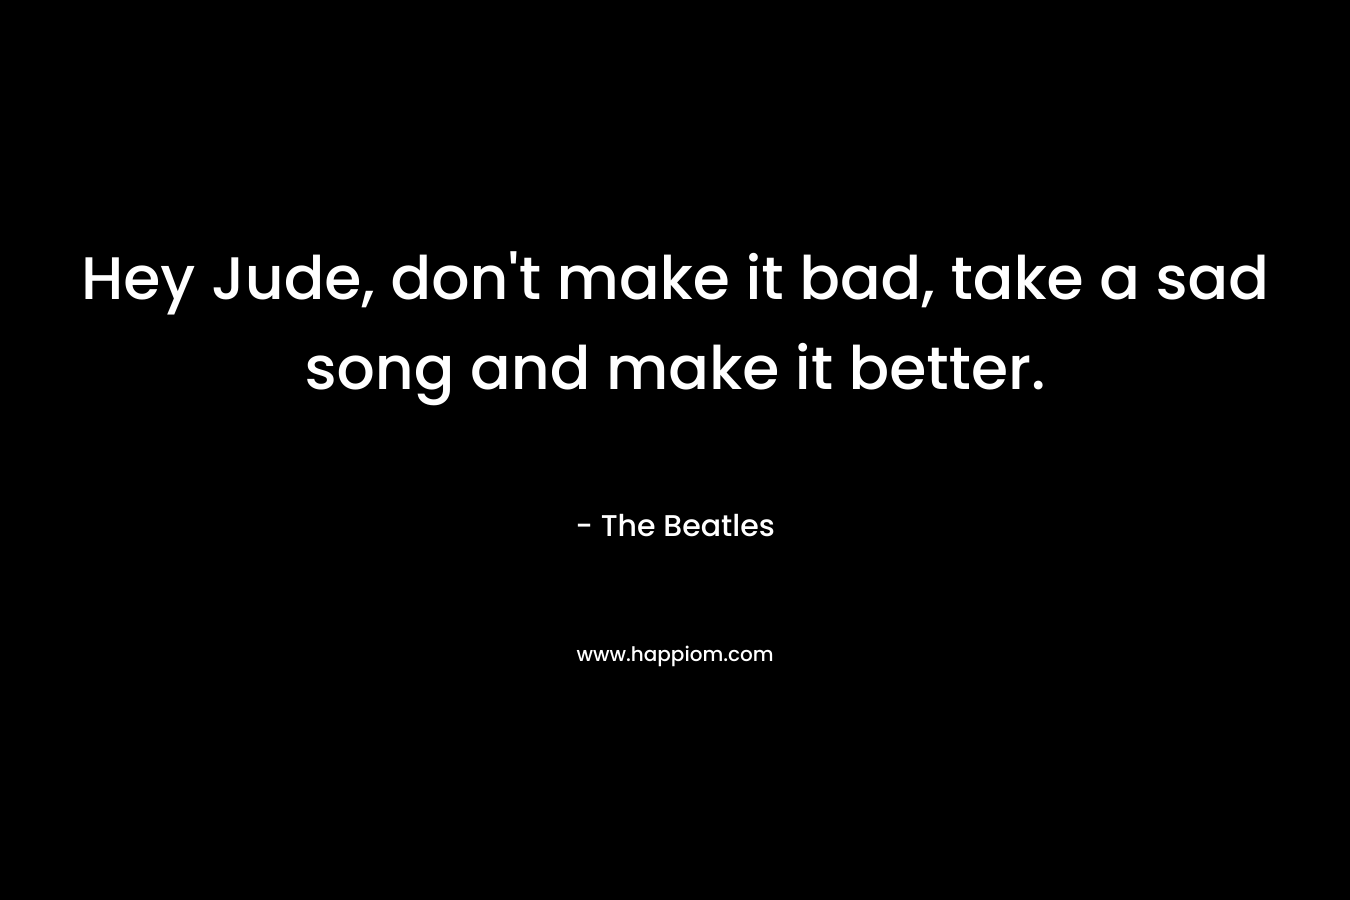 Hey Jude, don’t make it bad, take a sad song and make it better. – The Beatles